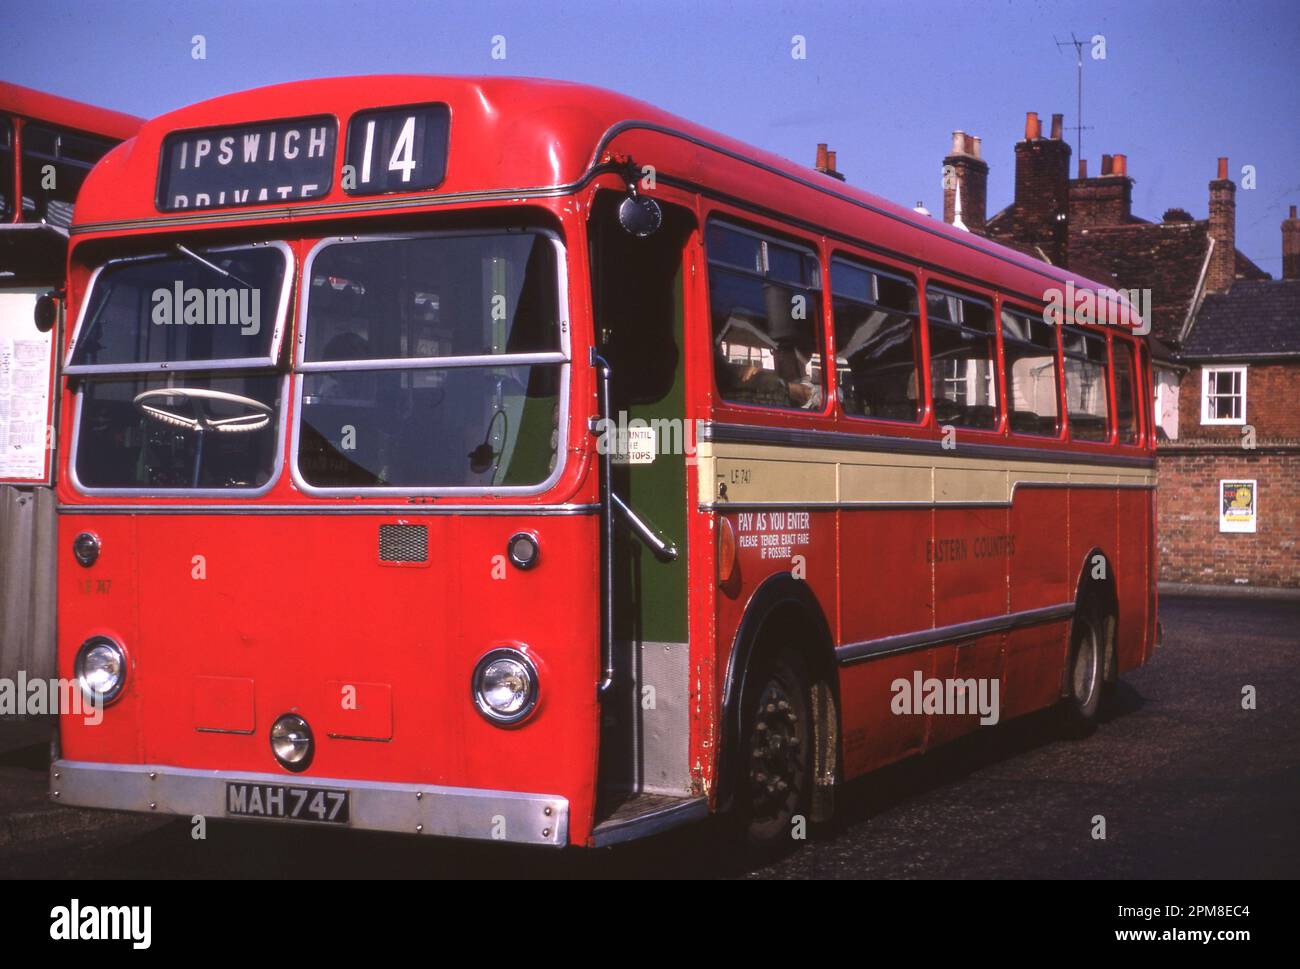 Red Bristol ECW Bus (MAH747) taken at Ipswich Bus Station, 22 July 1969   Photo by The Henshaw Archive Stock Photo